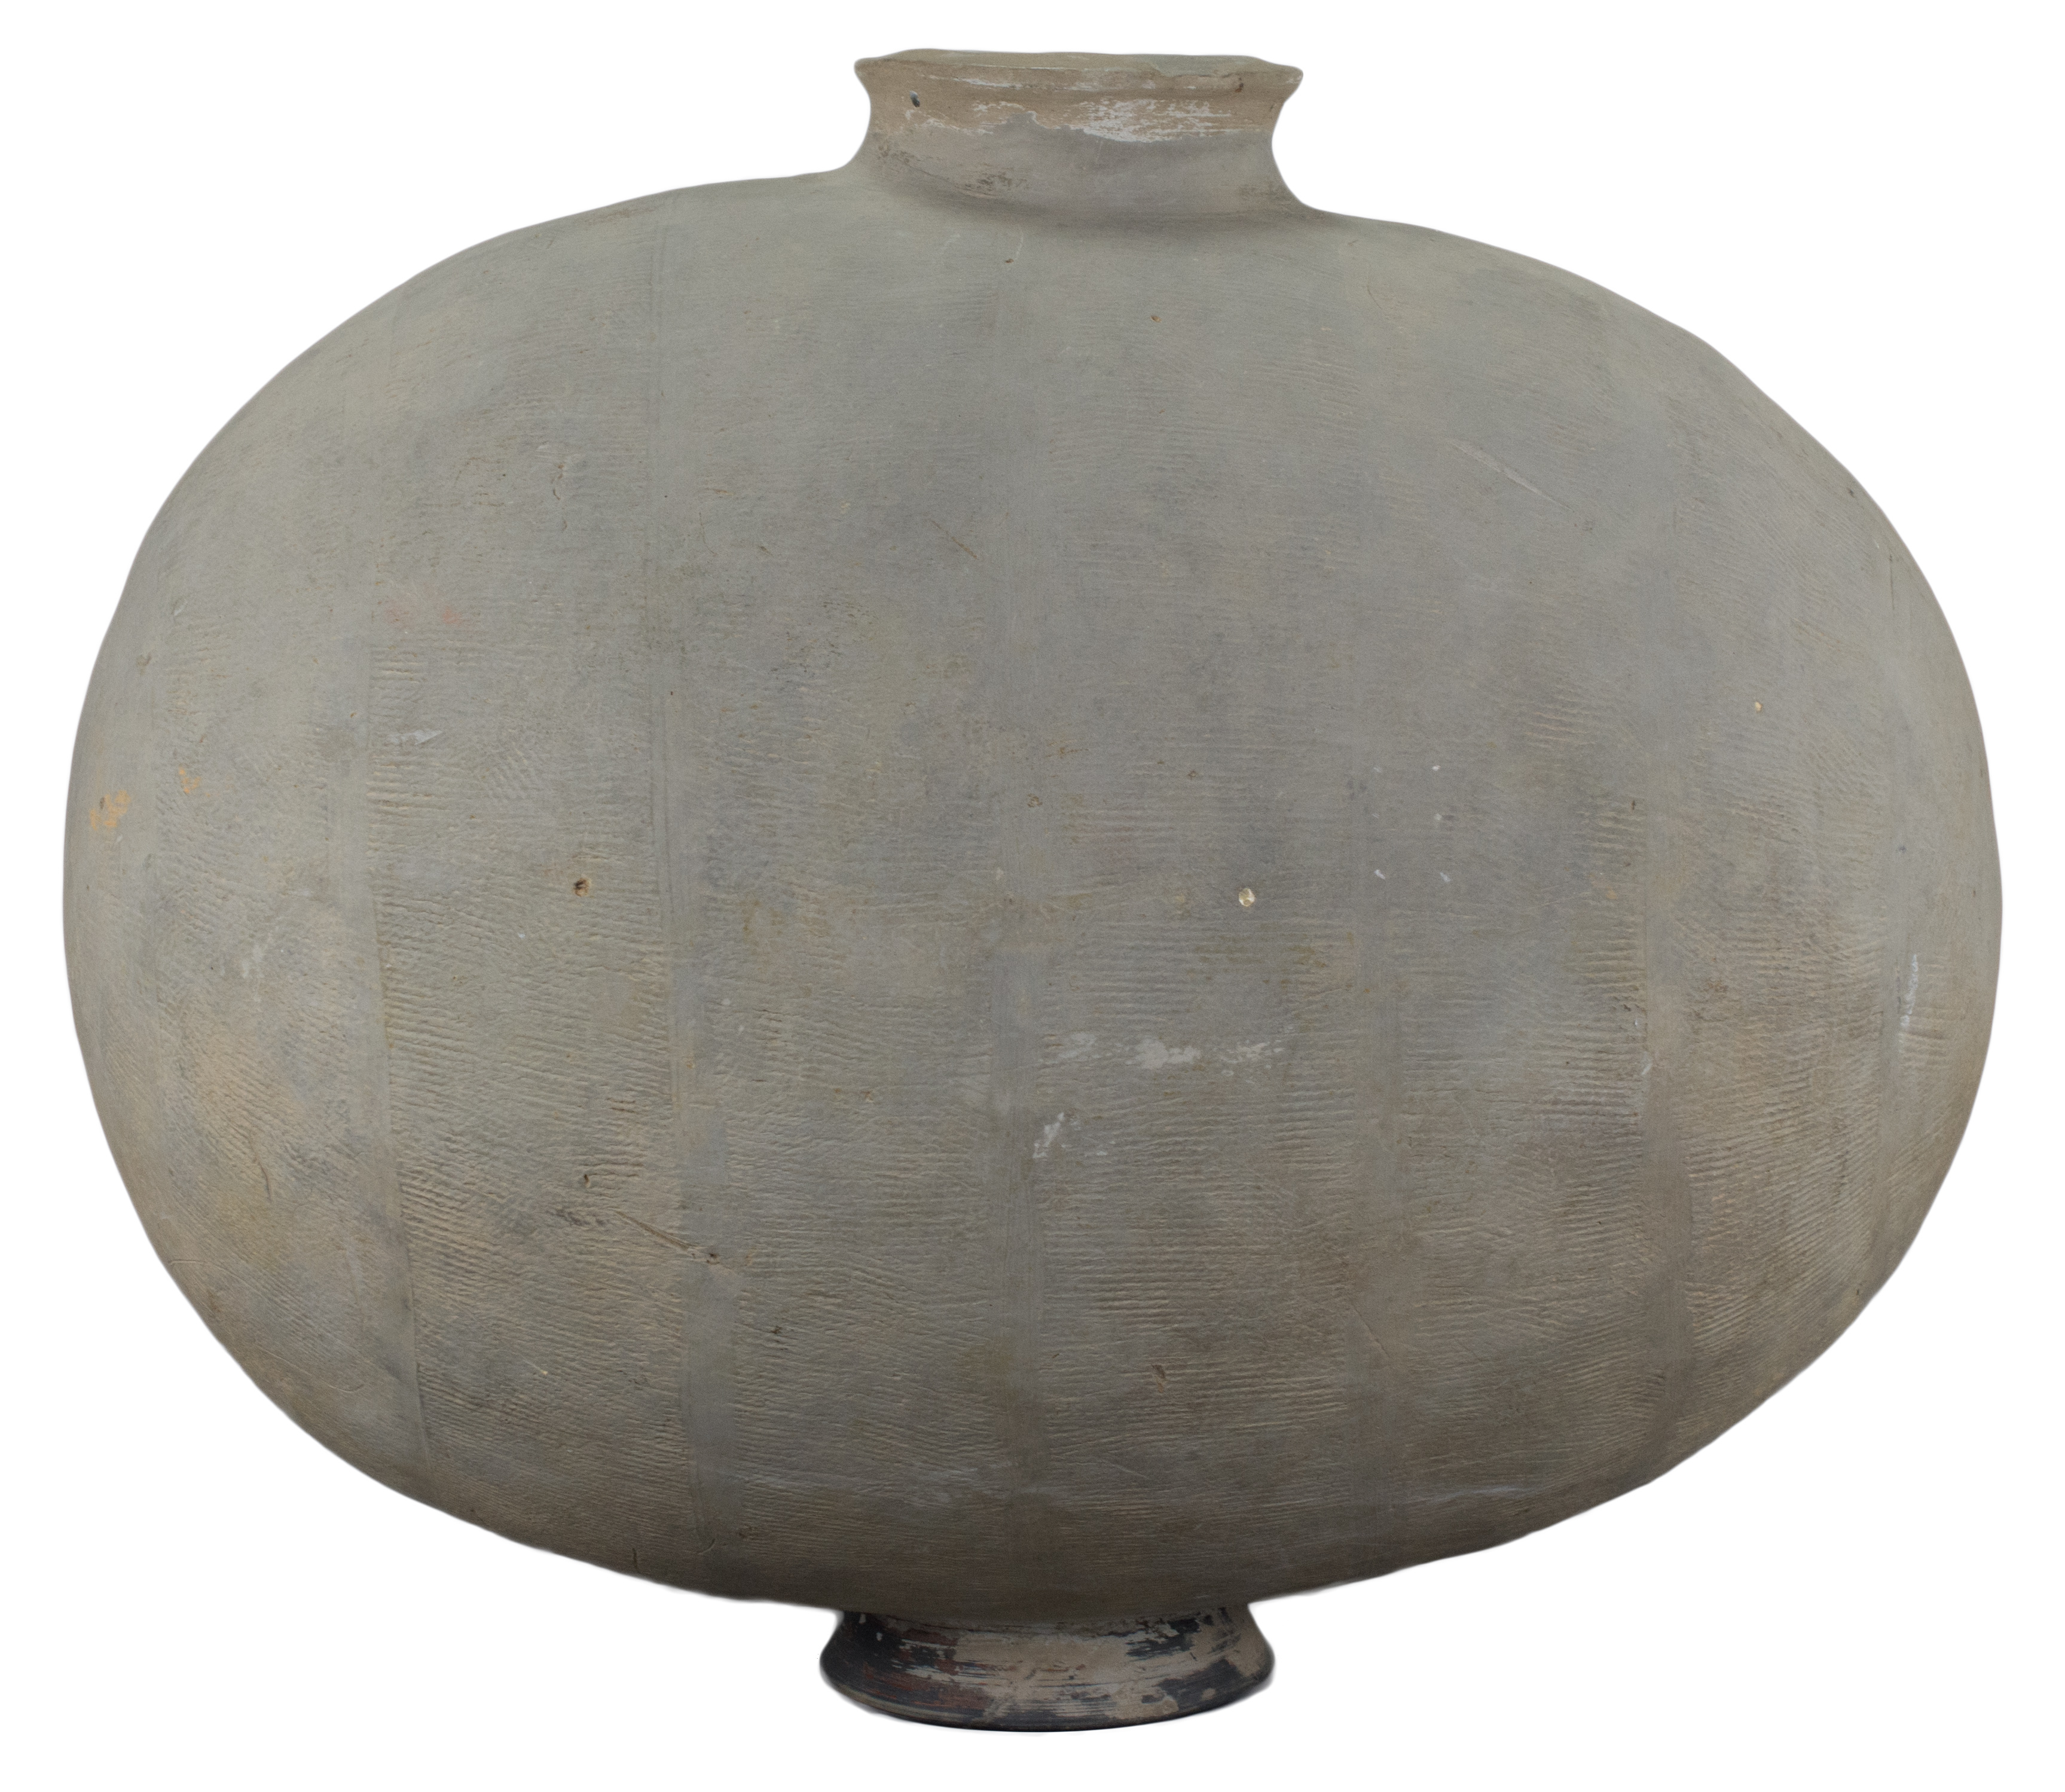 An Exceptionally LARGE Early Chinese Pottery Cocoon Jar with Oxford TL Test – Han Dynasty or Earlier